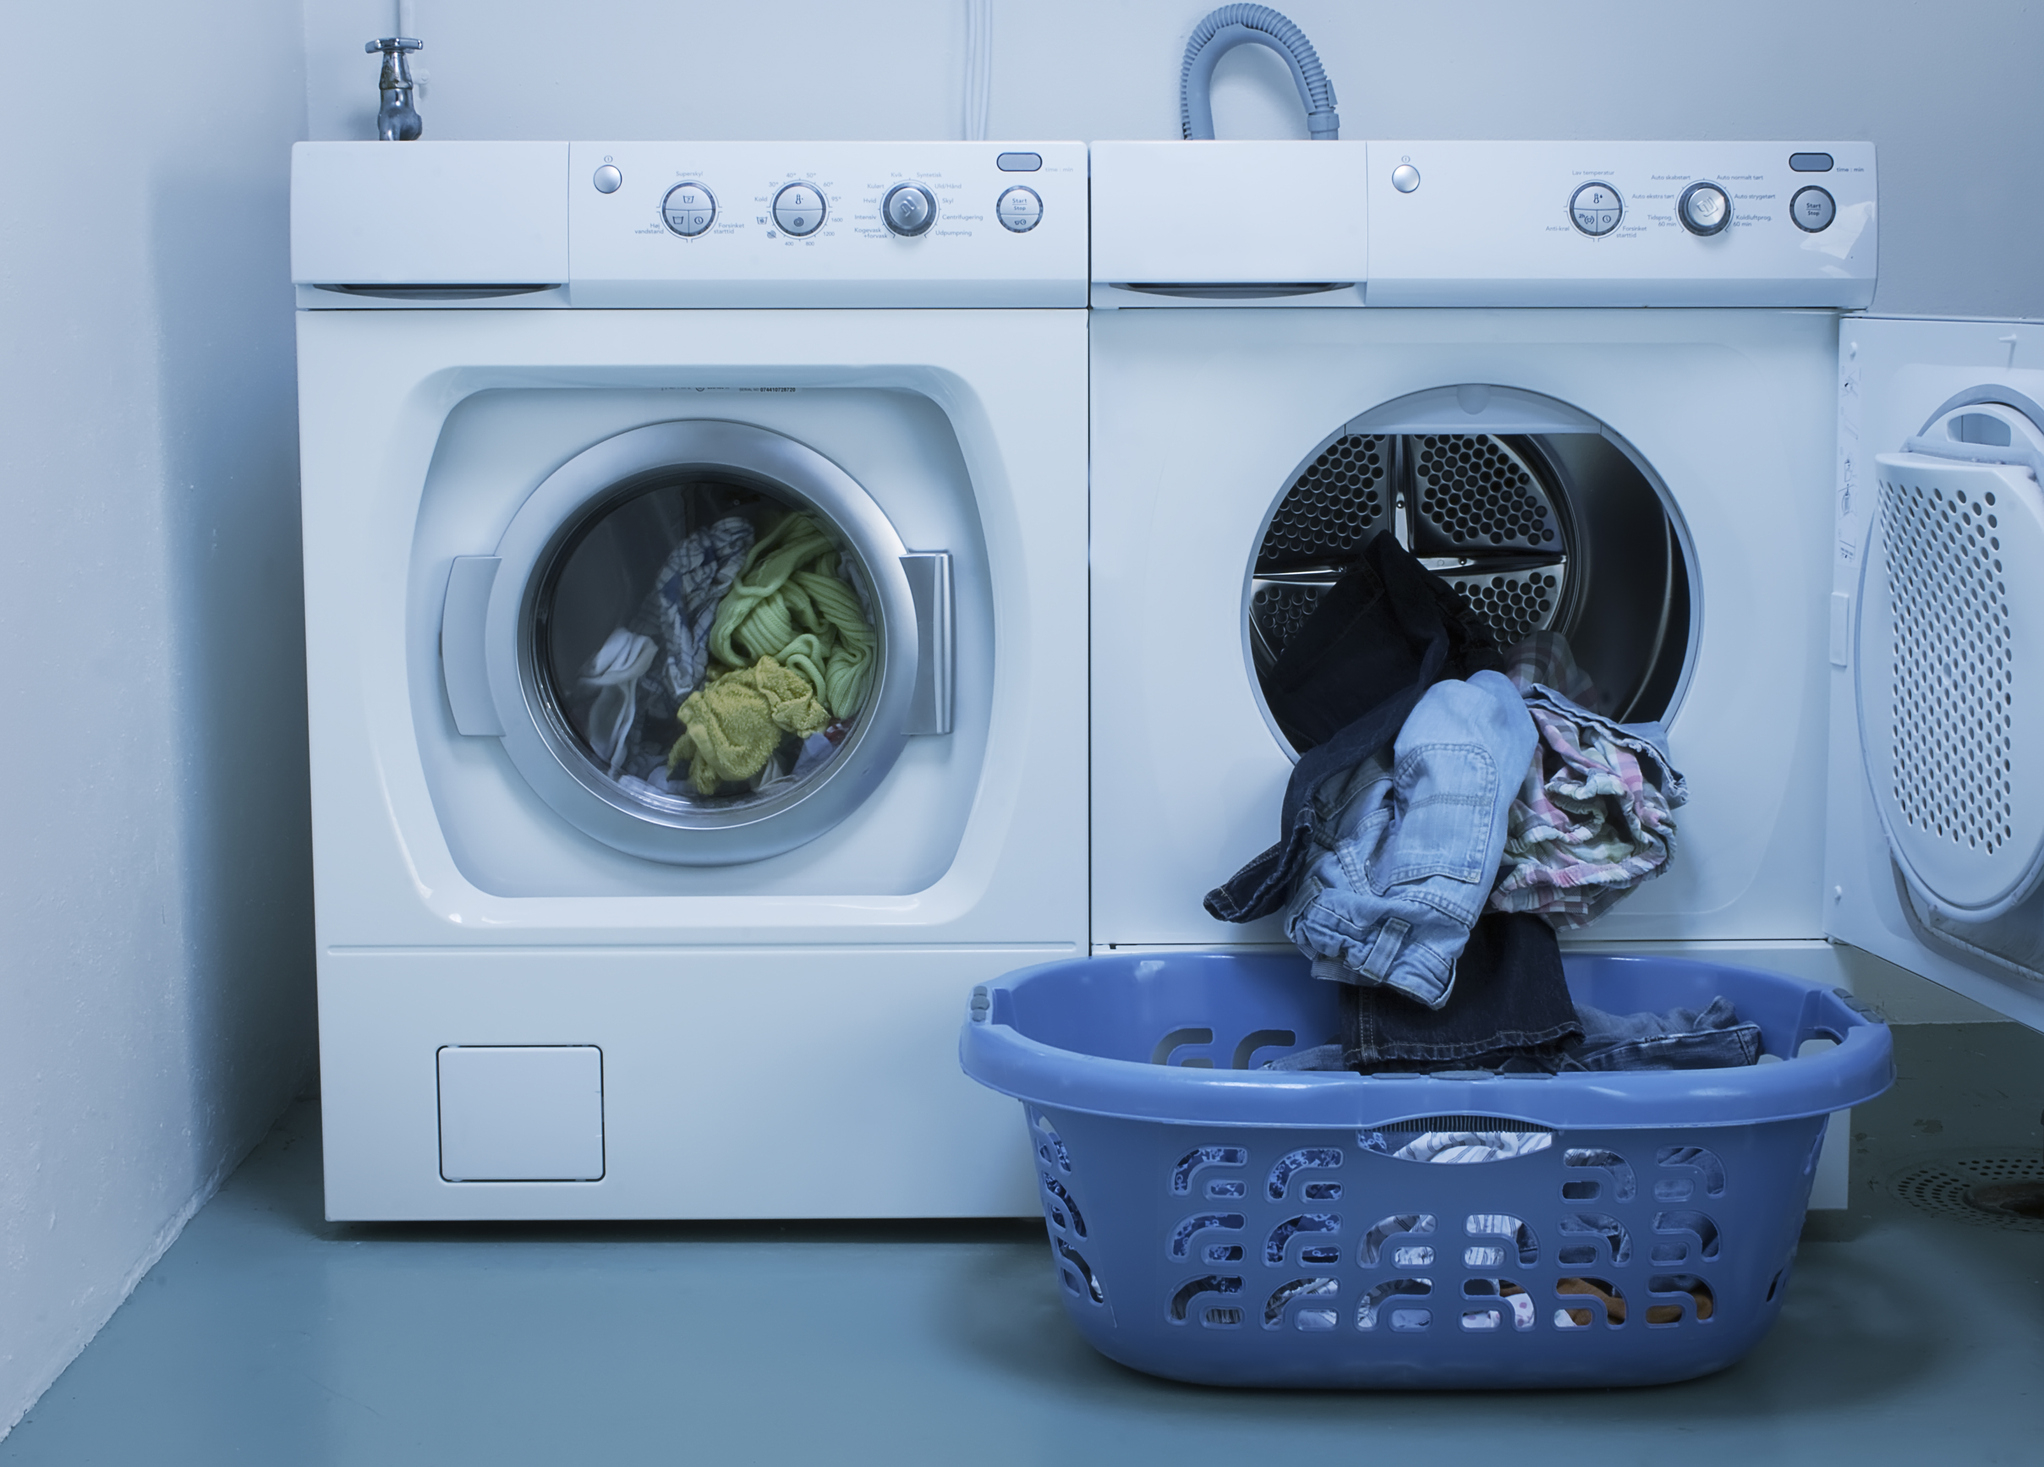 Washing machine in mid-cycle next to a dryer with an open door, and a laundry basket with clothes in front